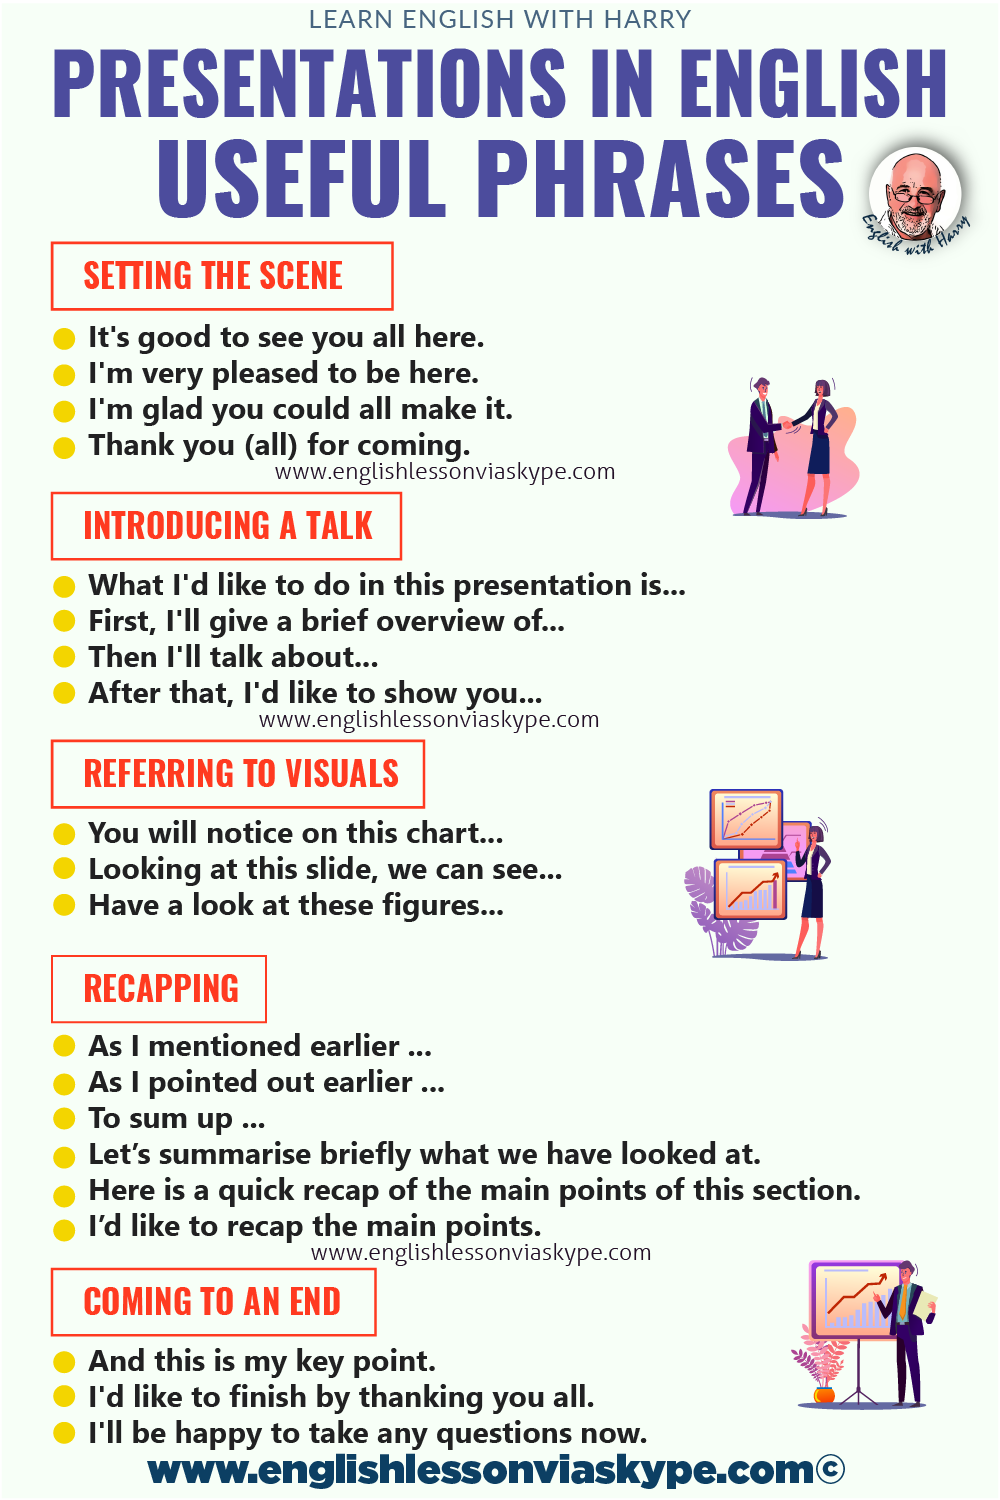 Useful phrases for presentations in English. Advanced English lessons on Zoom and Skype. Click the link and book your free tiral lesson at englishlessonviaskype.com #learnenglish